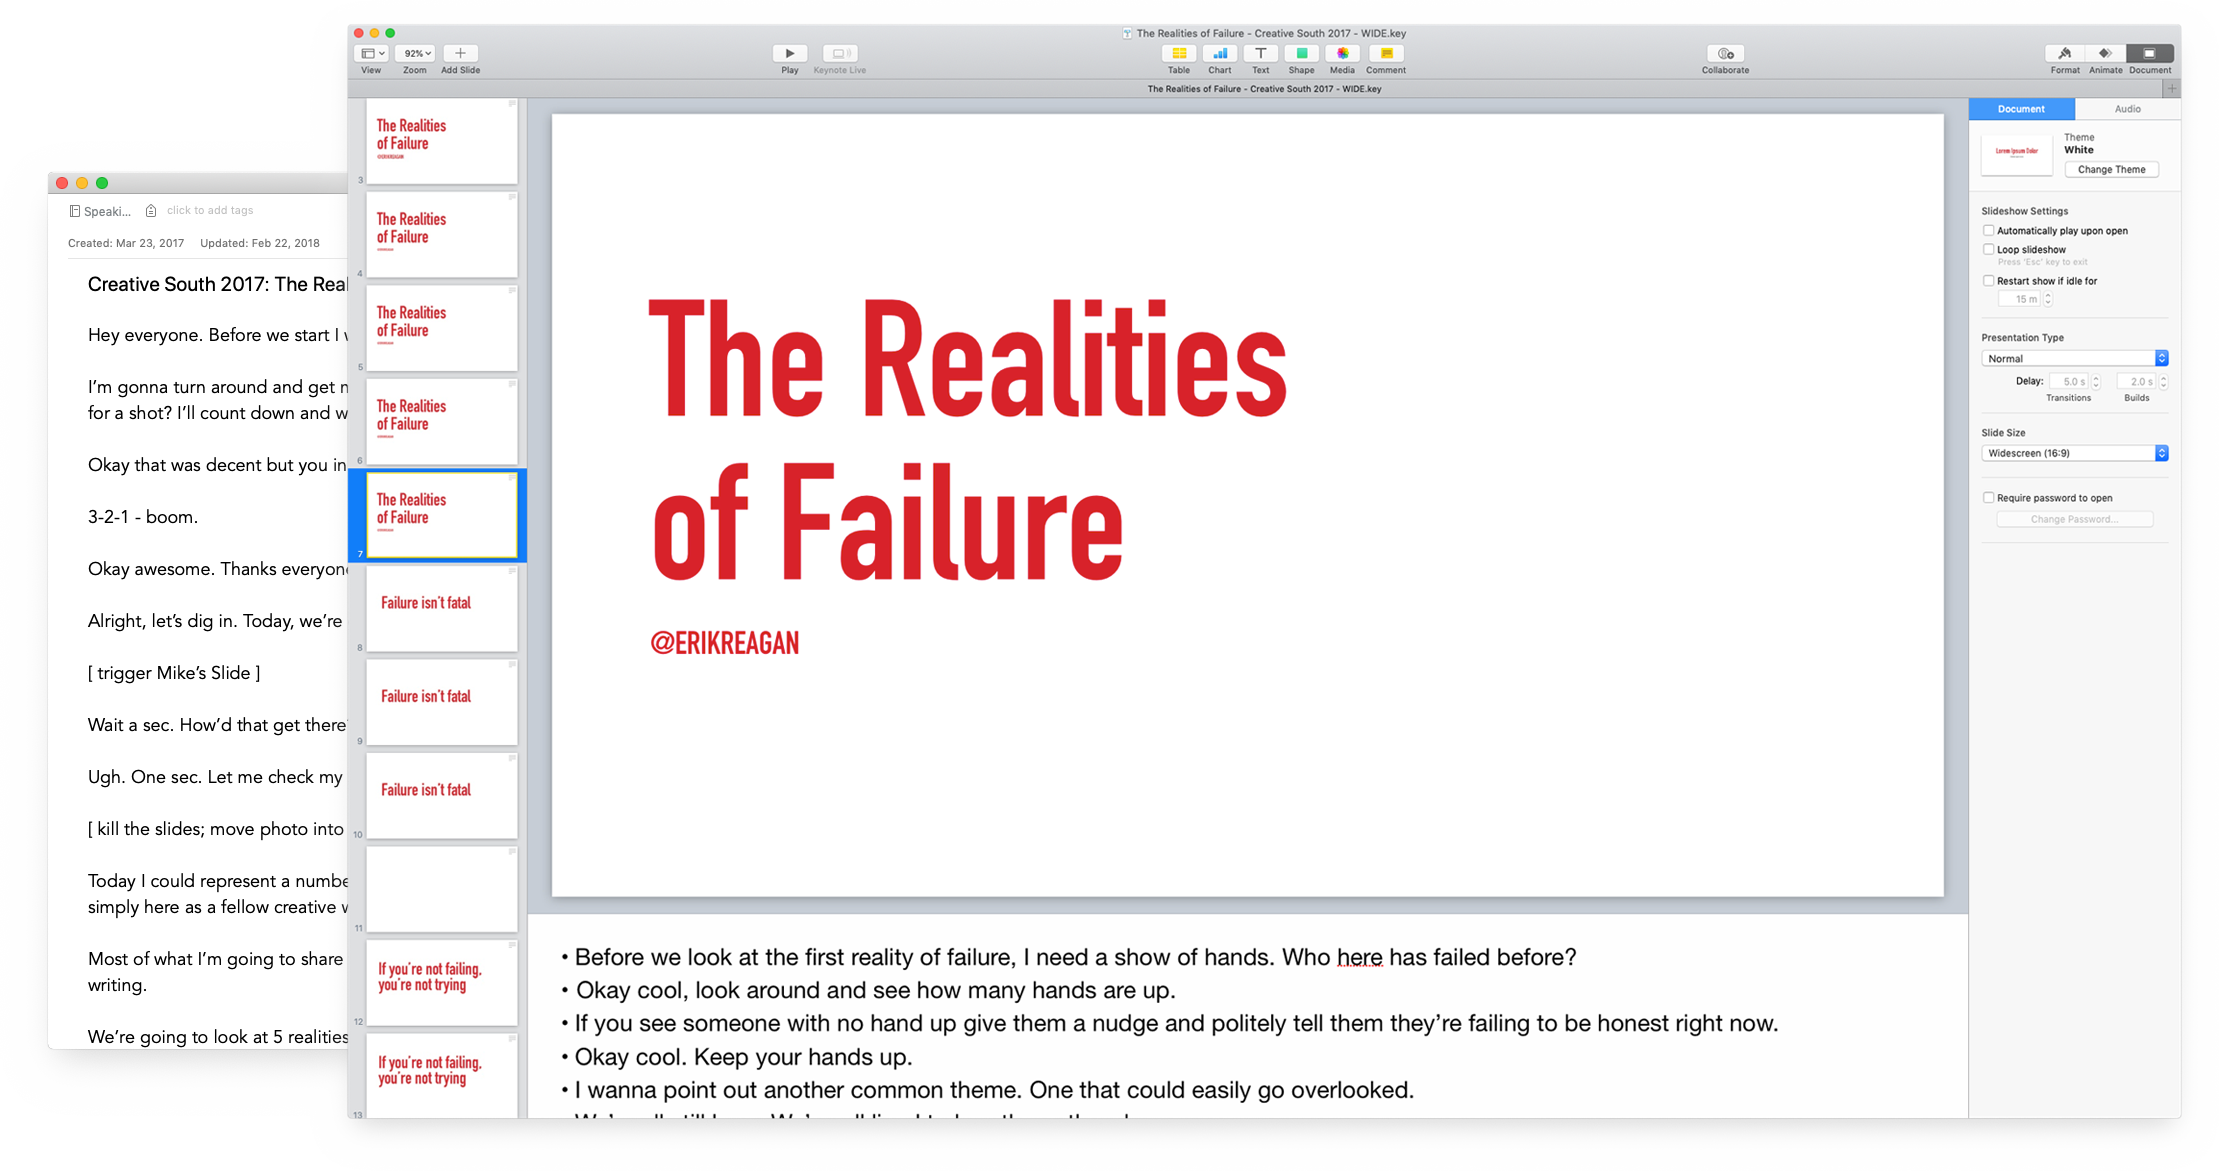 Screenshot of my talk notes and slides in progress